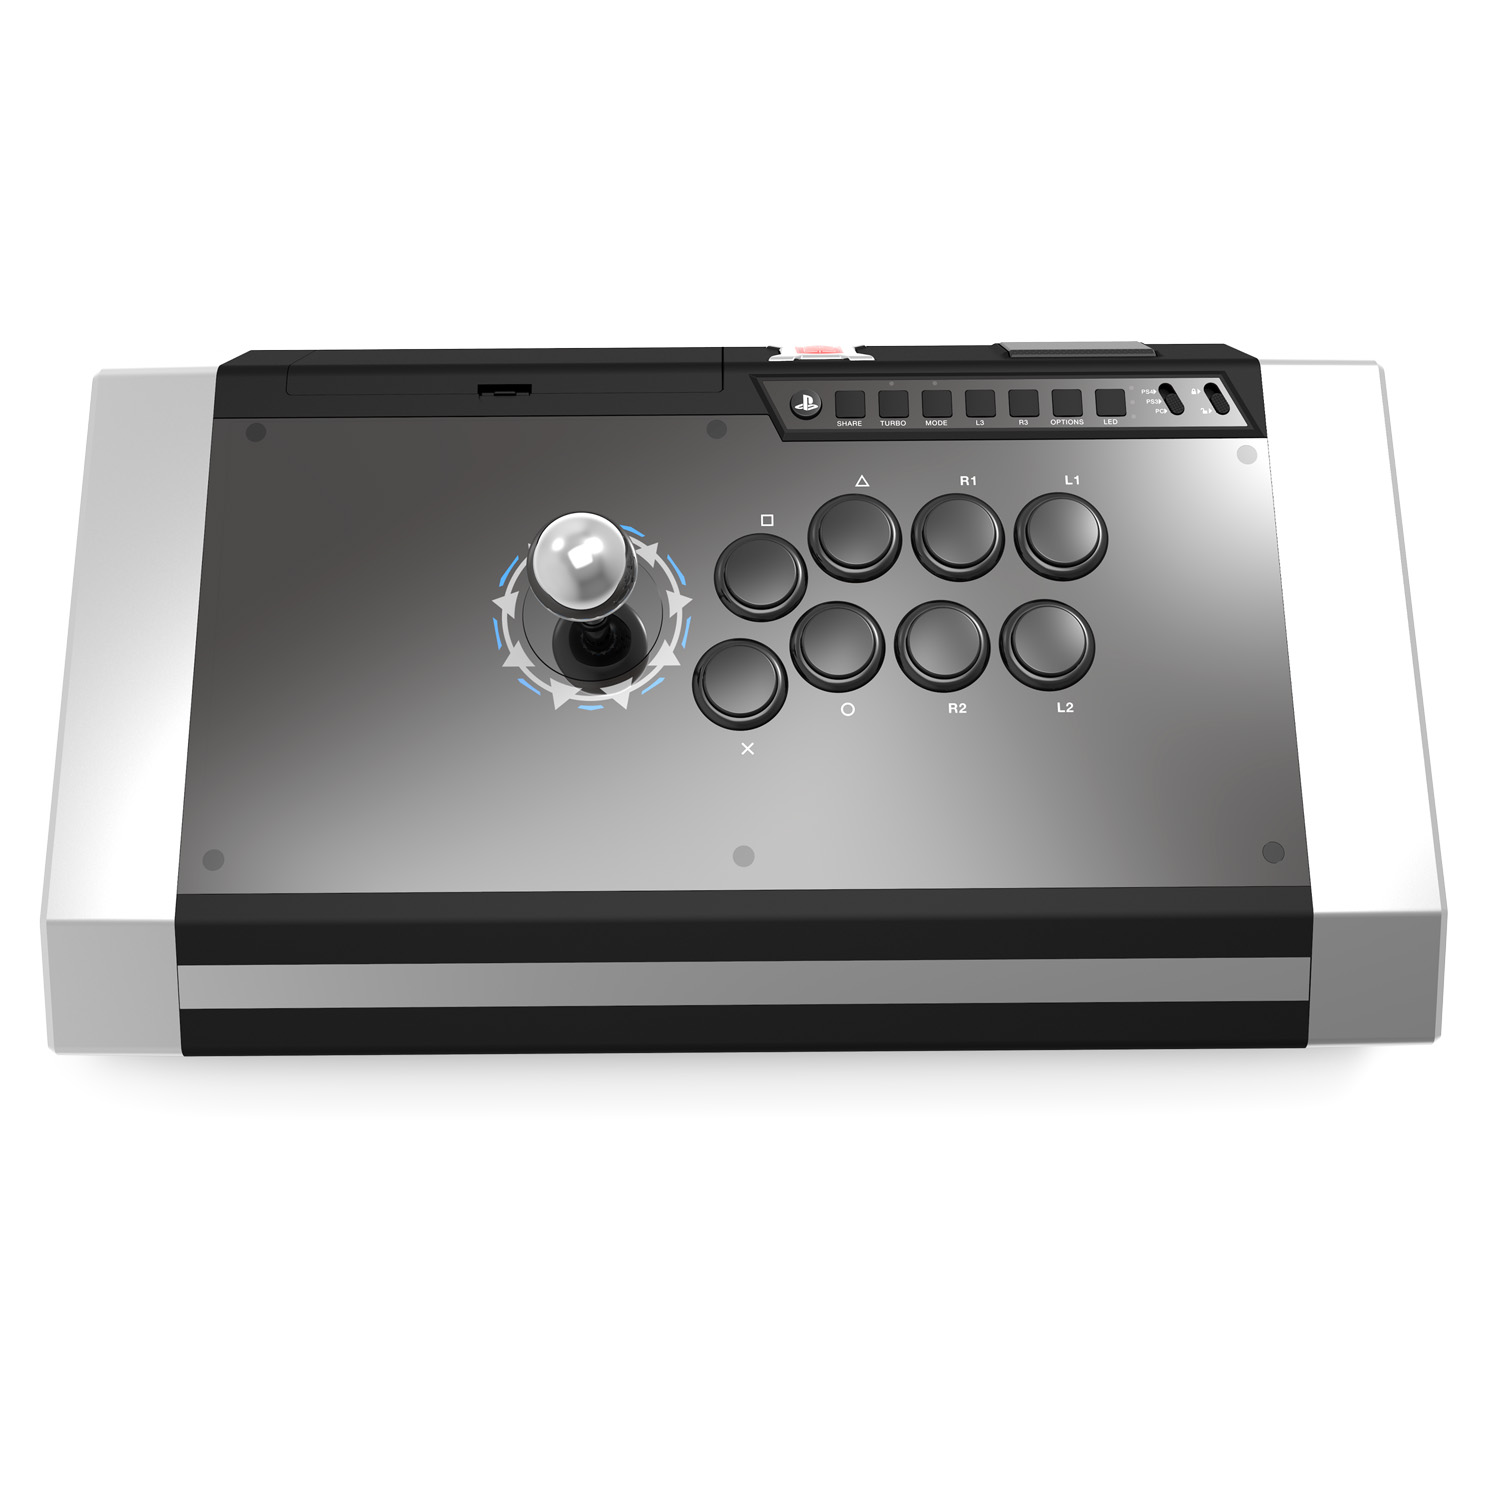 Qanba Joystick for PS5 PS3 PC (Fighting Stick) Licensed Product